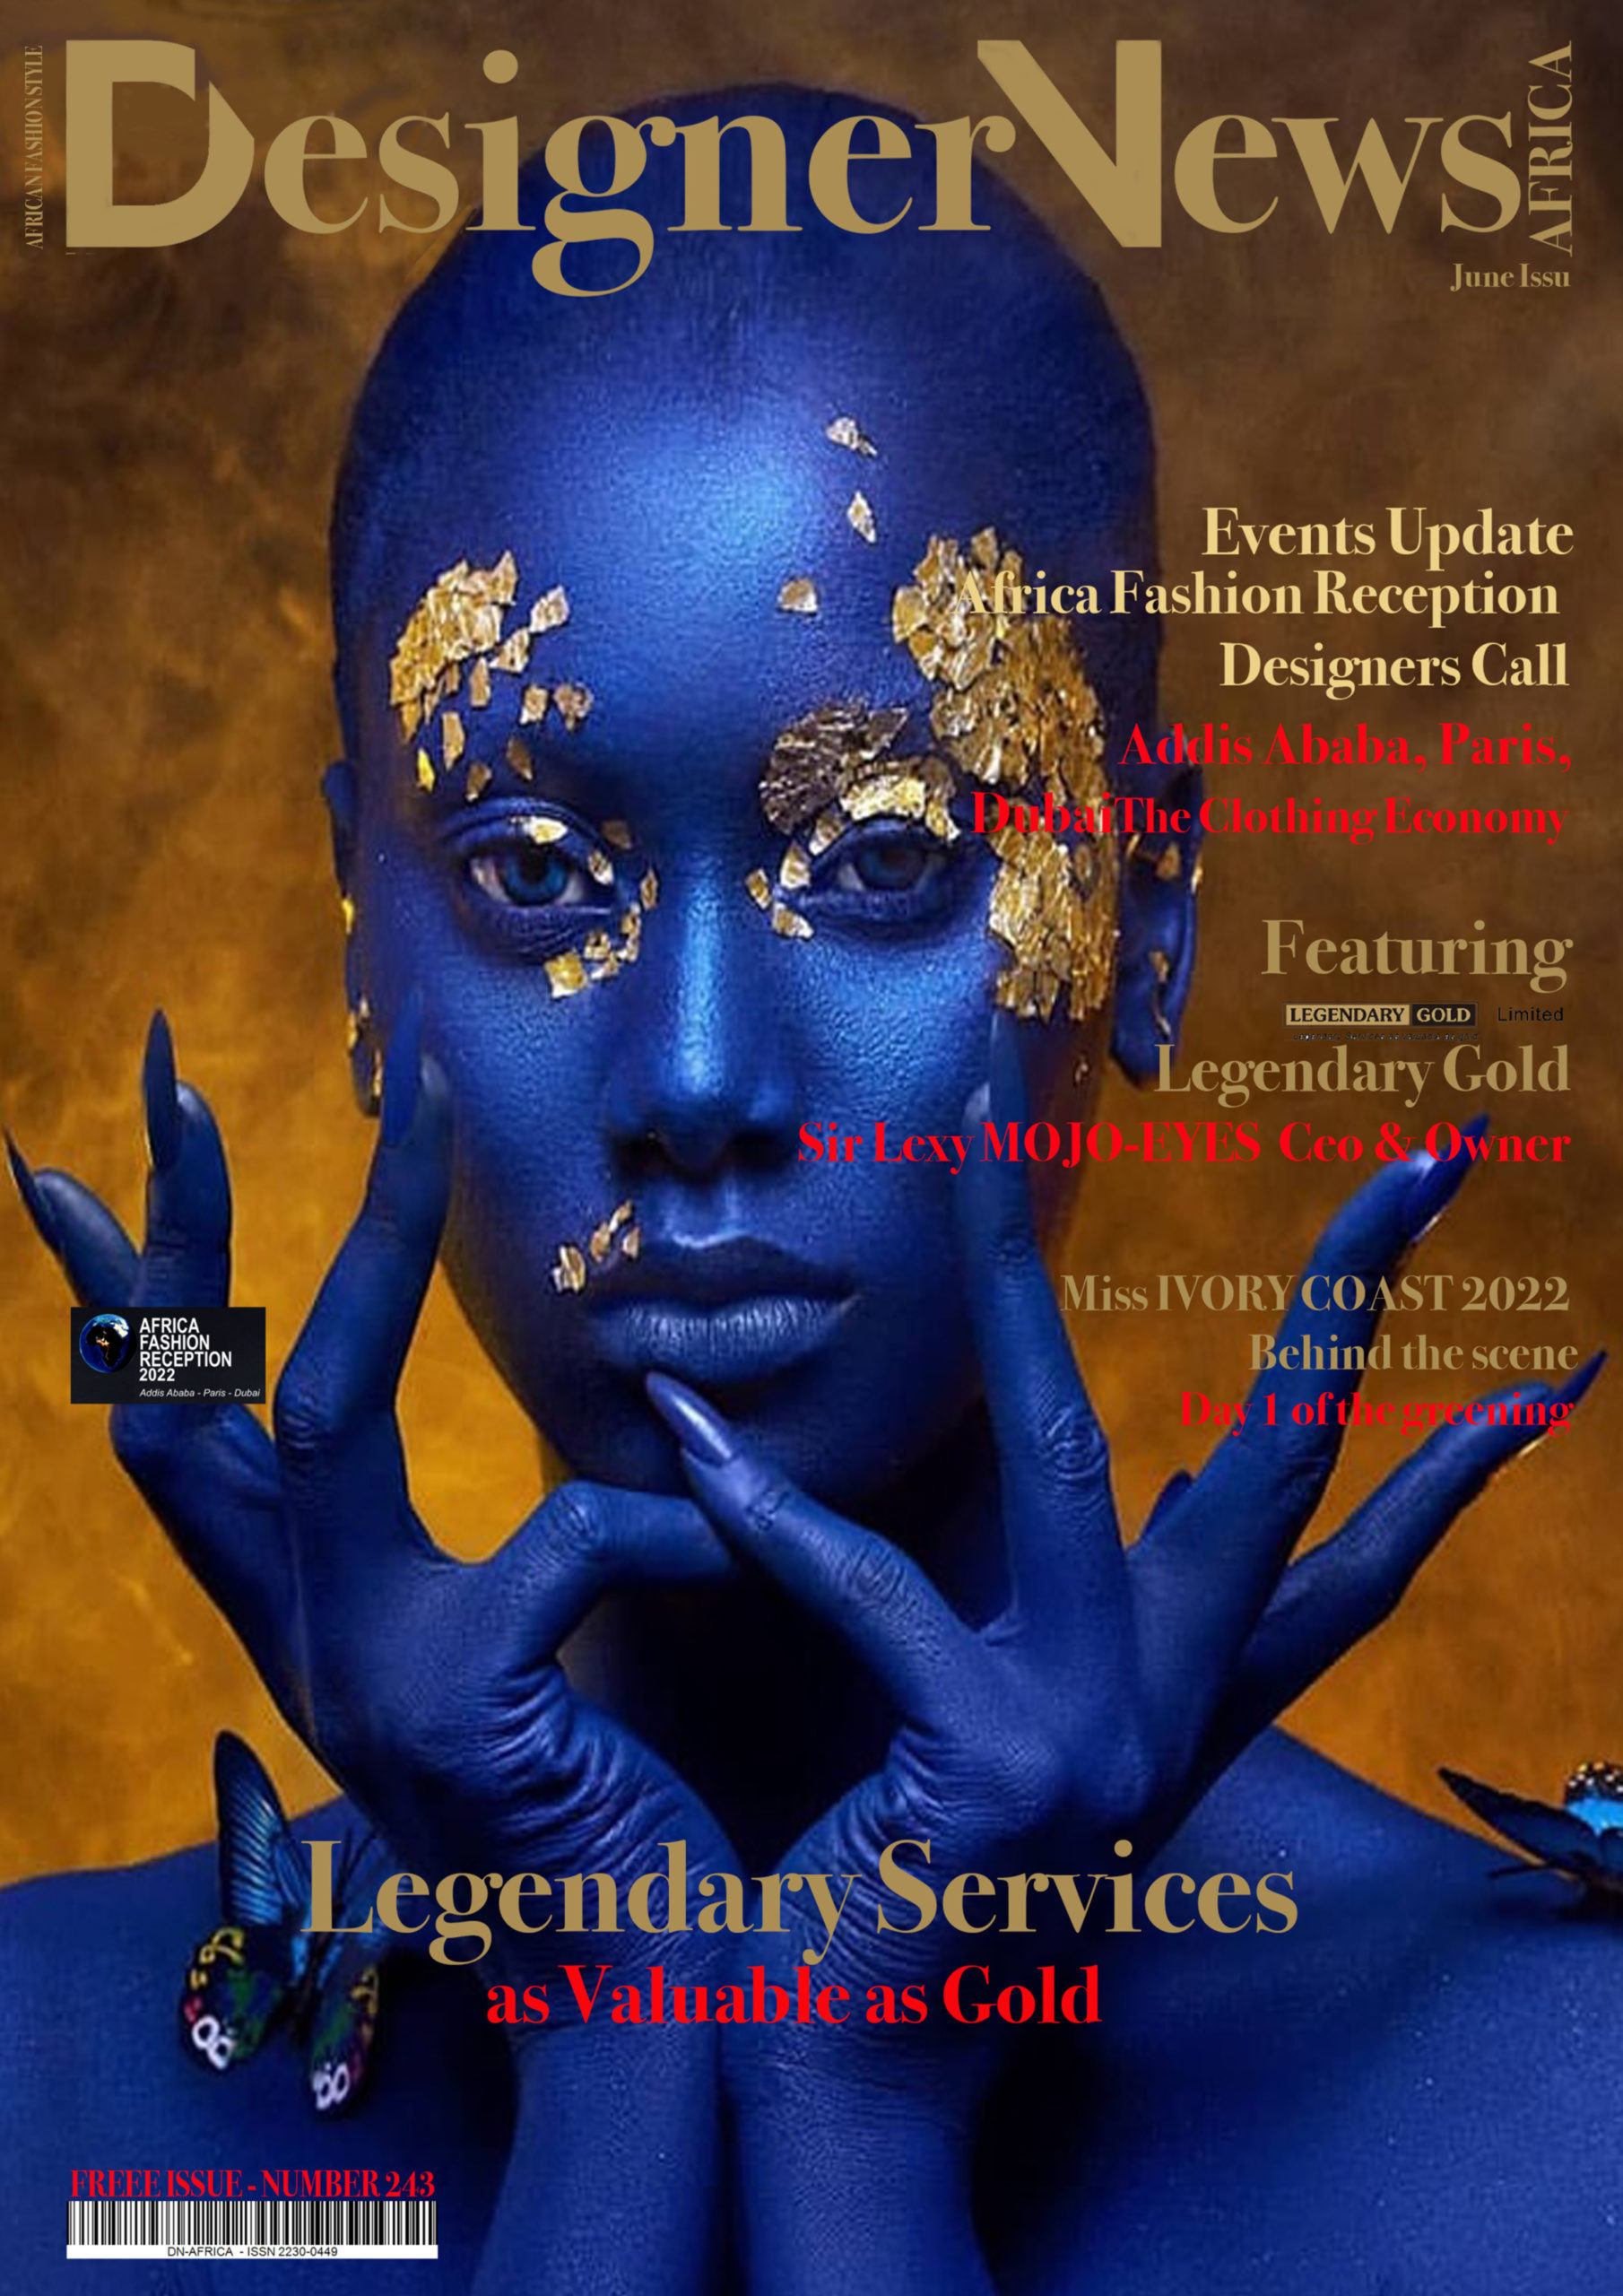 2490X3522-COVER-DN-AFRICA-COVER-JUN-2022-MAG-NUMBER-243-2022-AFRICAN-FASHION-RECEPTION-BY-LEGENDARY-GOLD-LEXY-MOYO-EYES-Ceo-and-Owner-DN-AFRICA-DN-A-INERNATIONAL-Media-Partner-AS-VOGUE-COVER